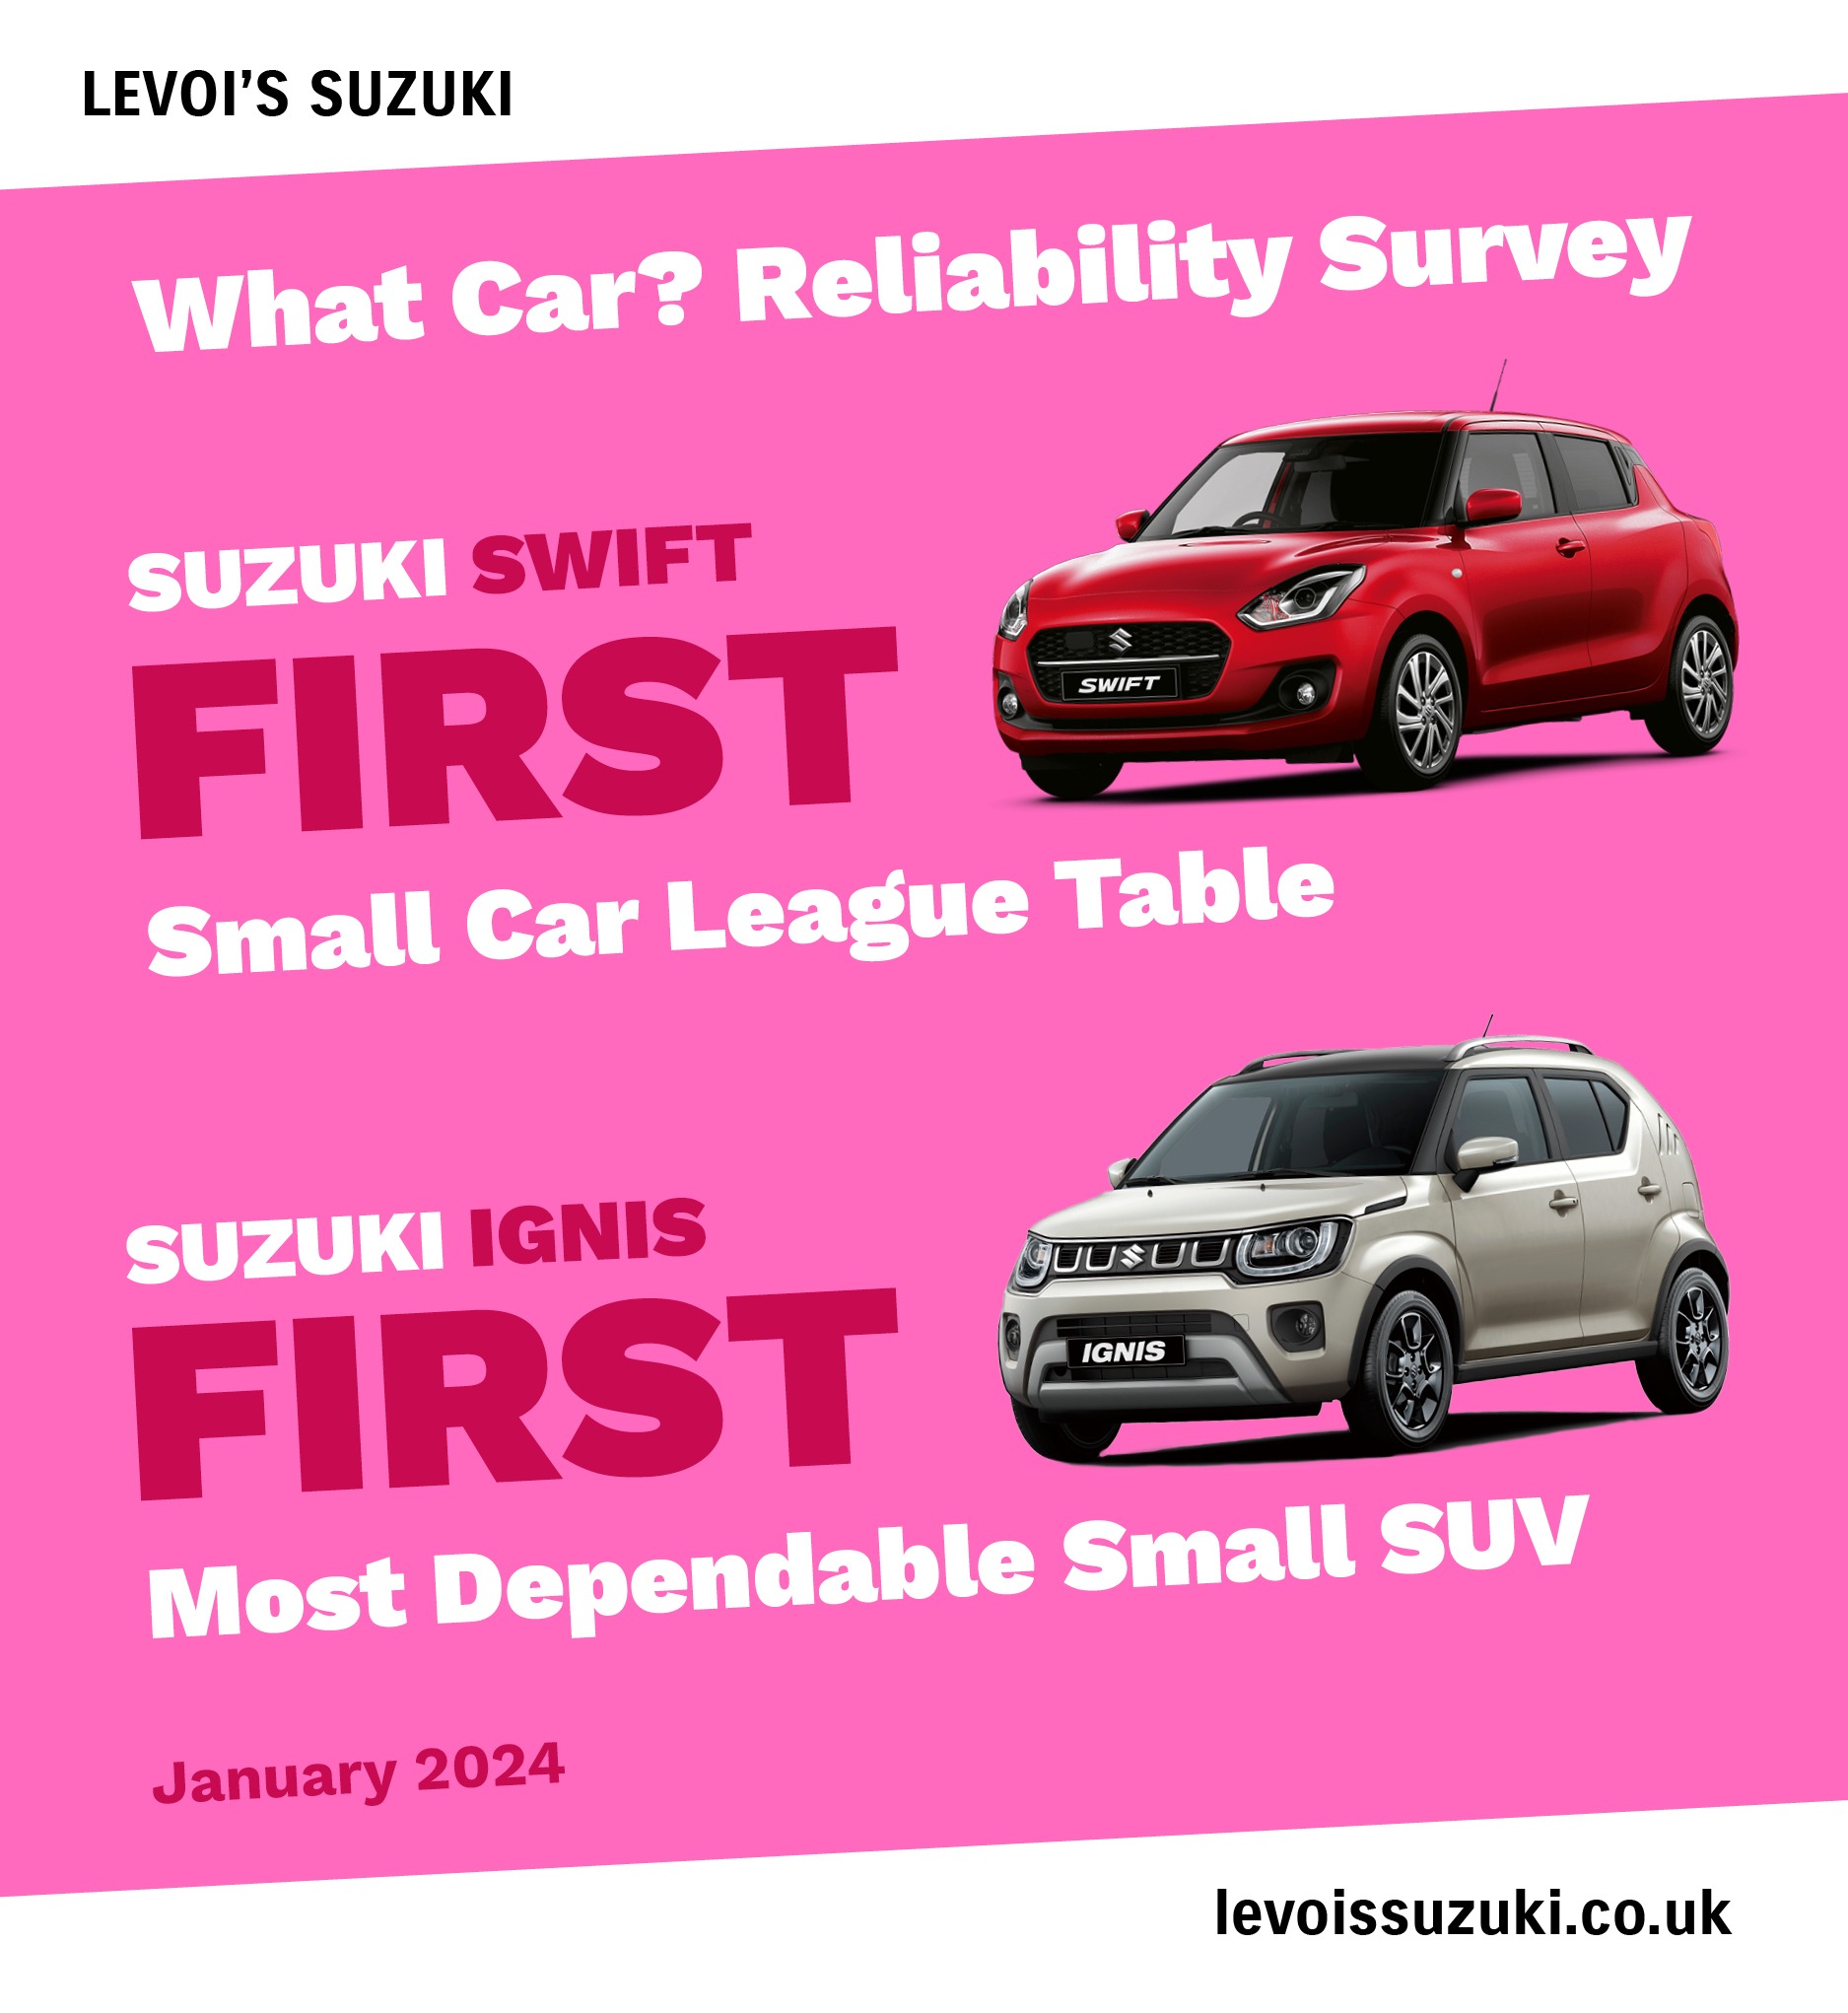 SWIFT AND IGNIS TOP THE SMALL CAR LEAGUE